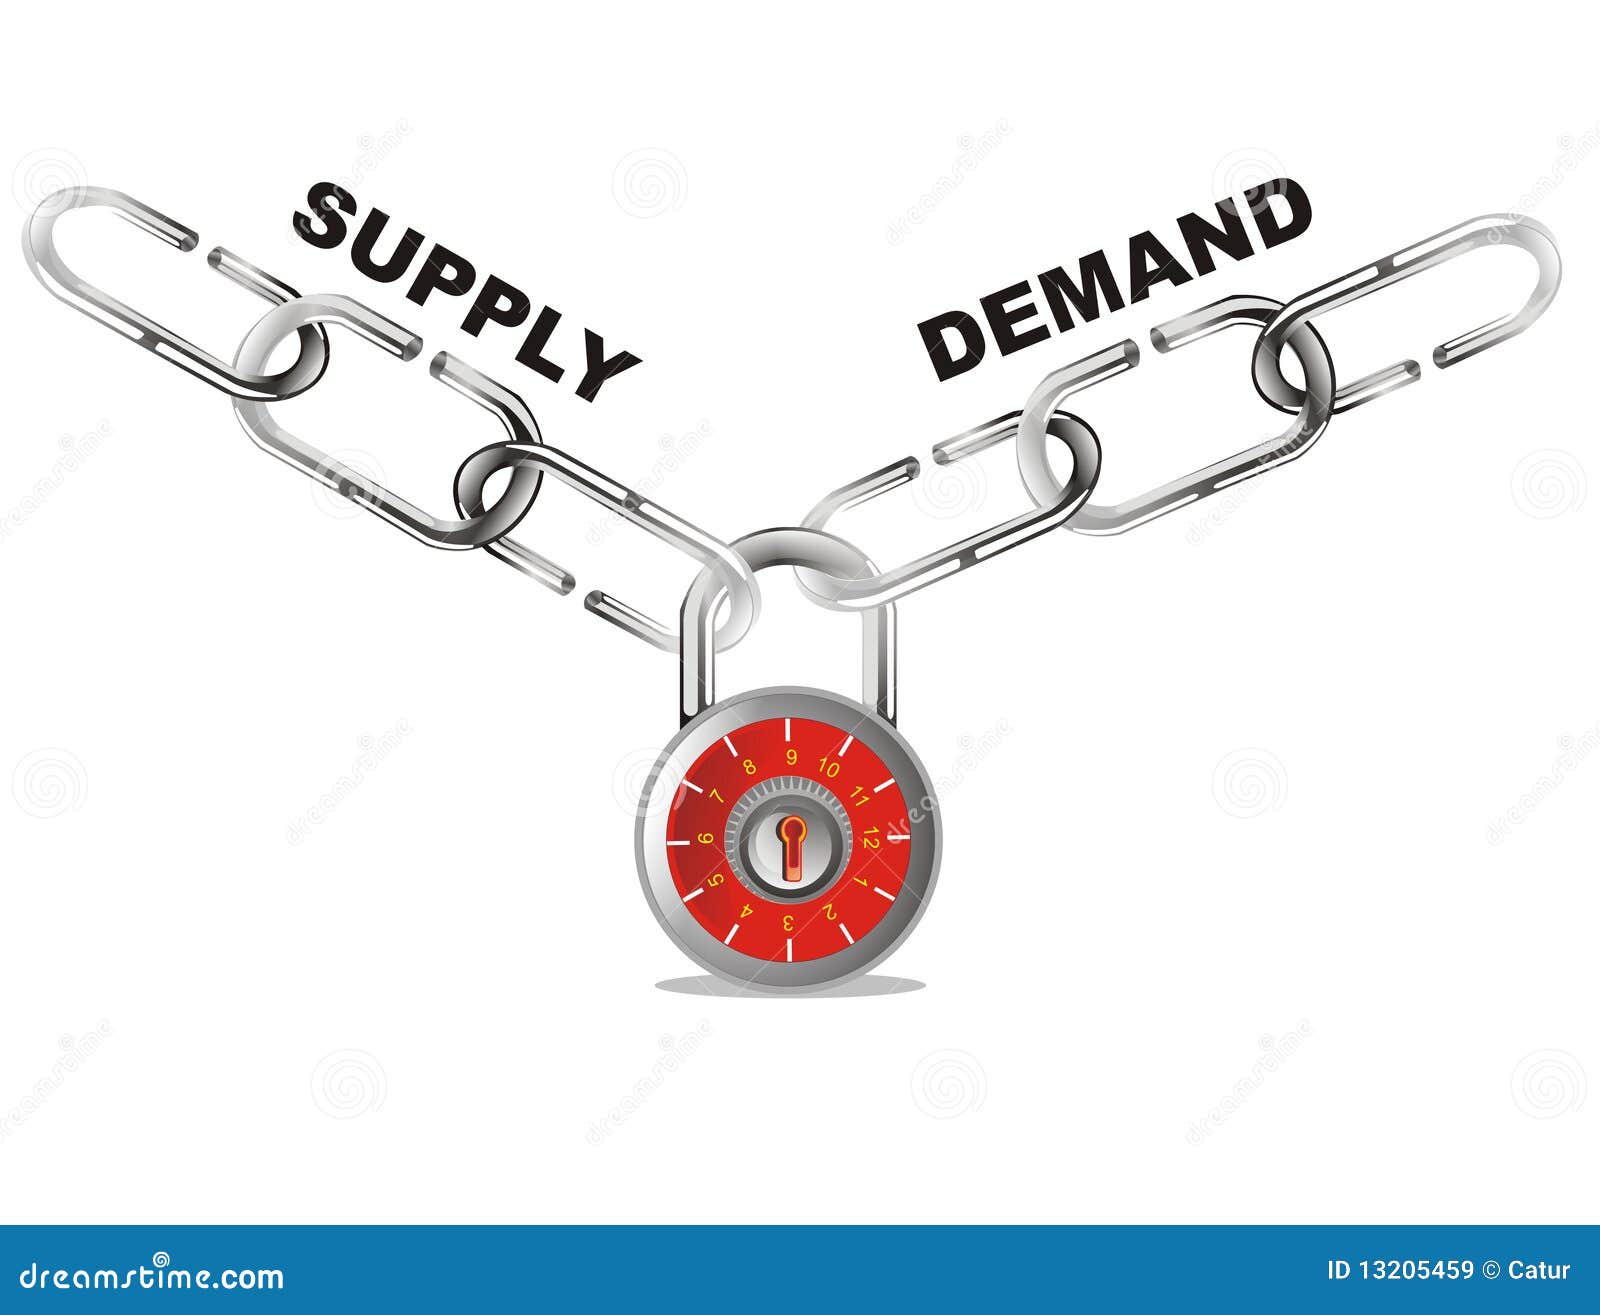 supply and demand connect chain